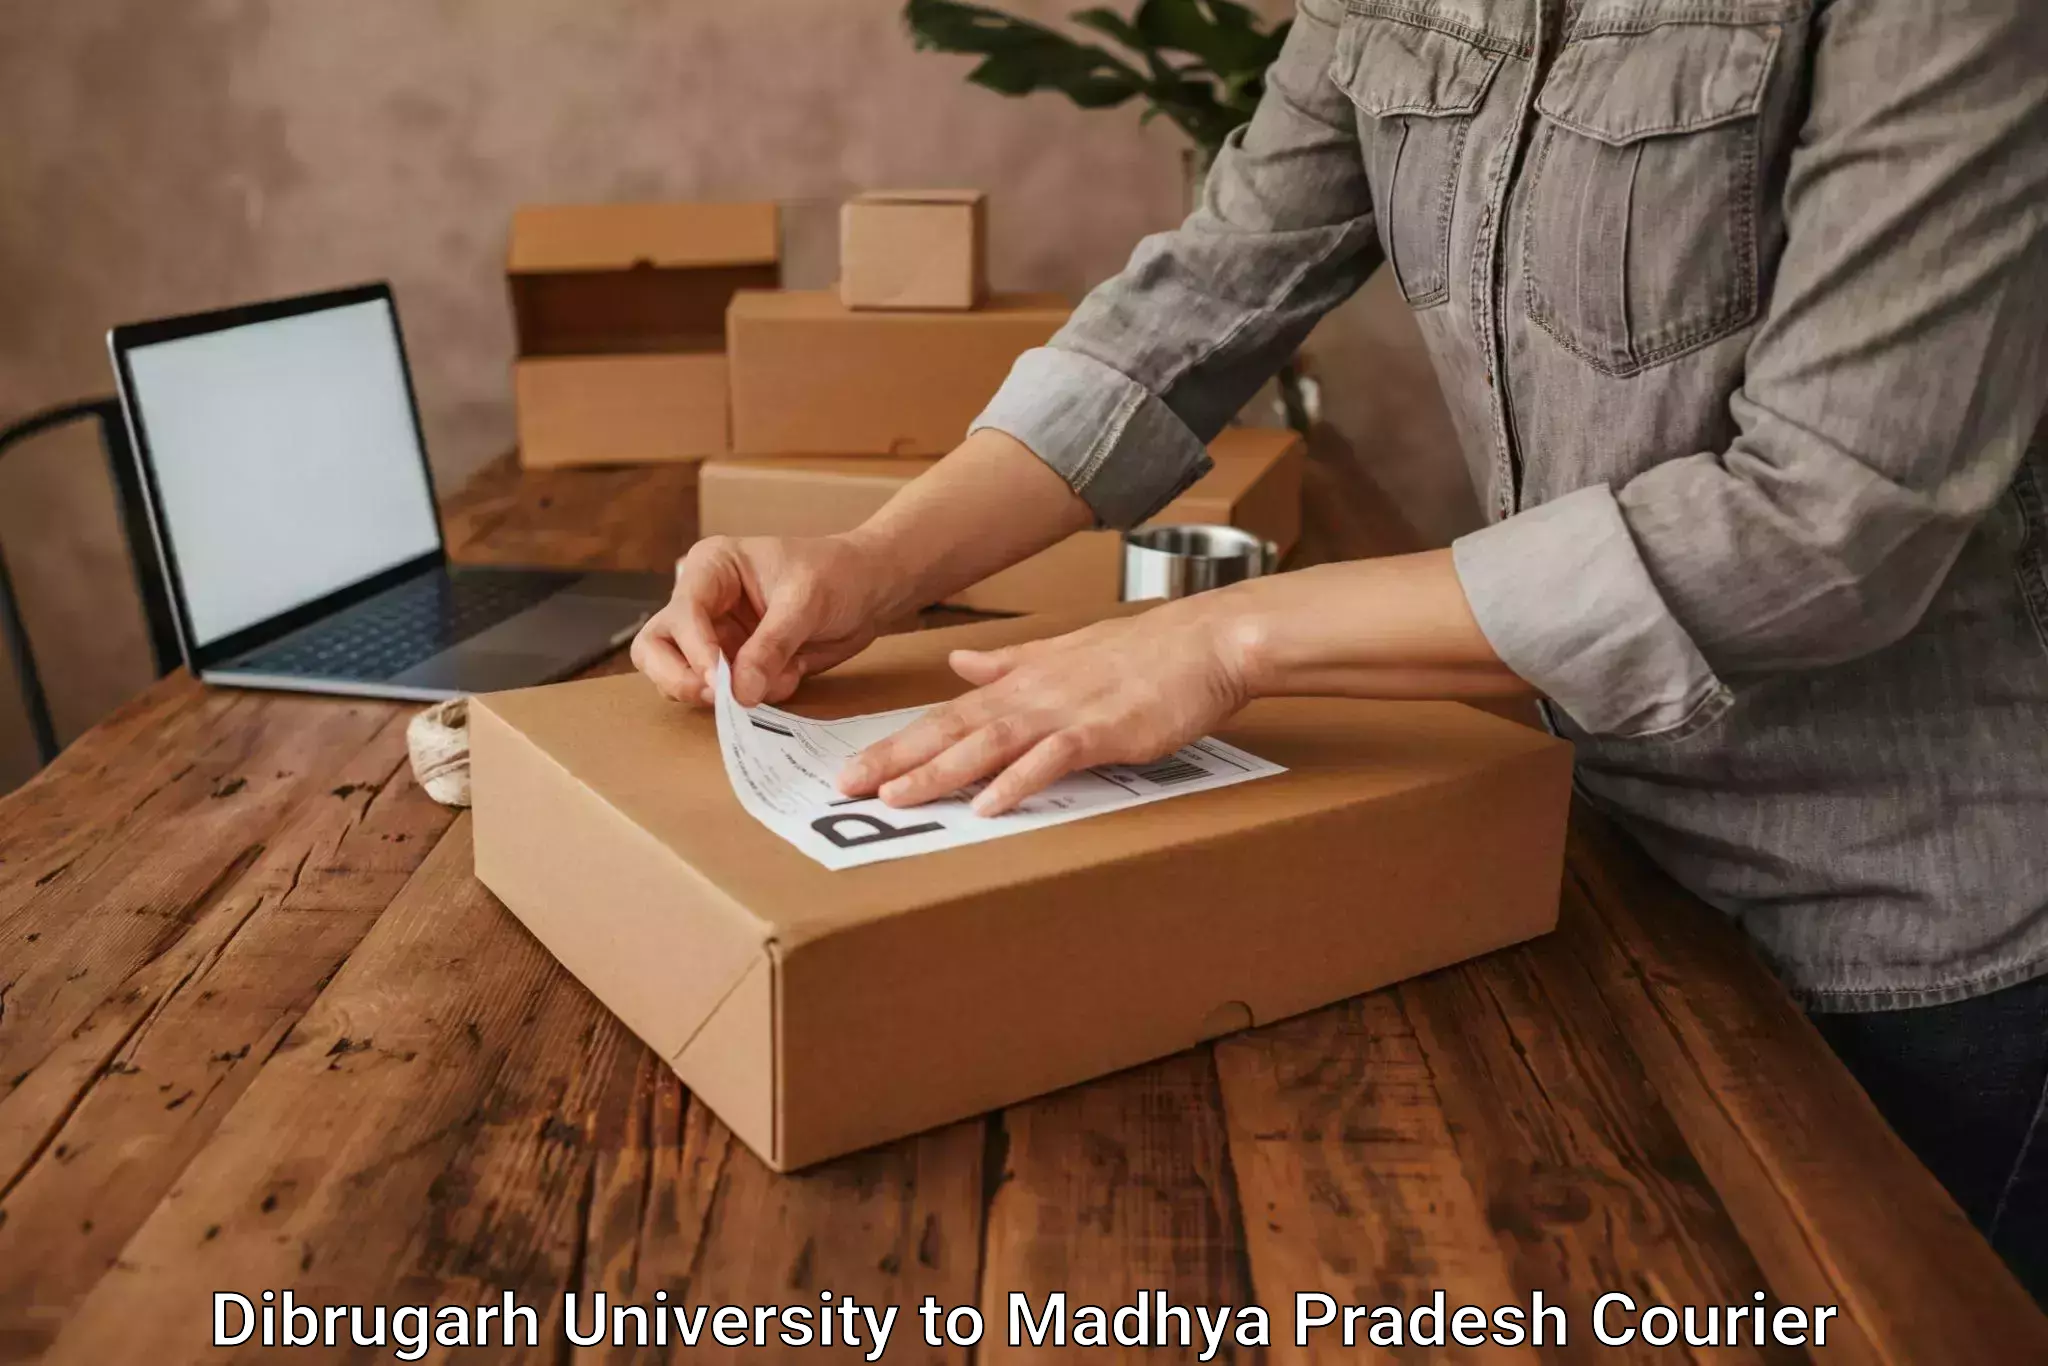 Package delivery network Dibrugarh University to Manasa